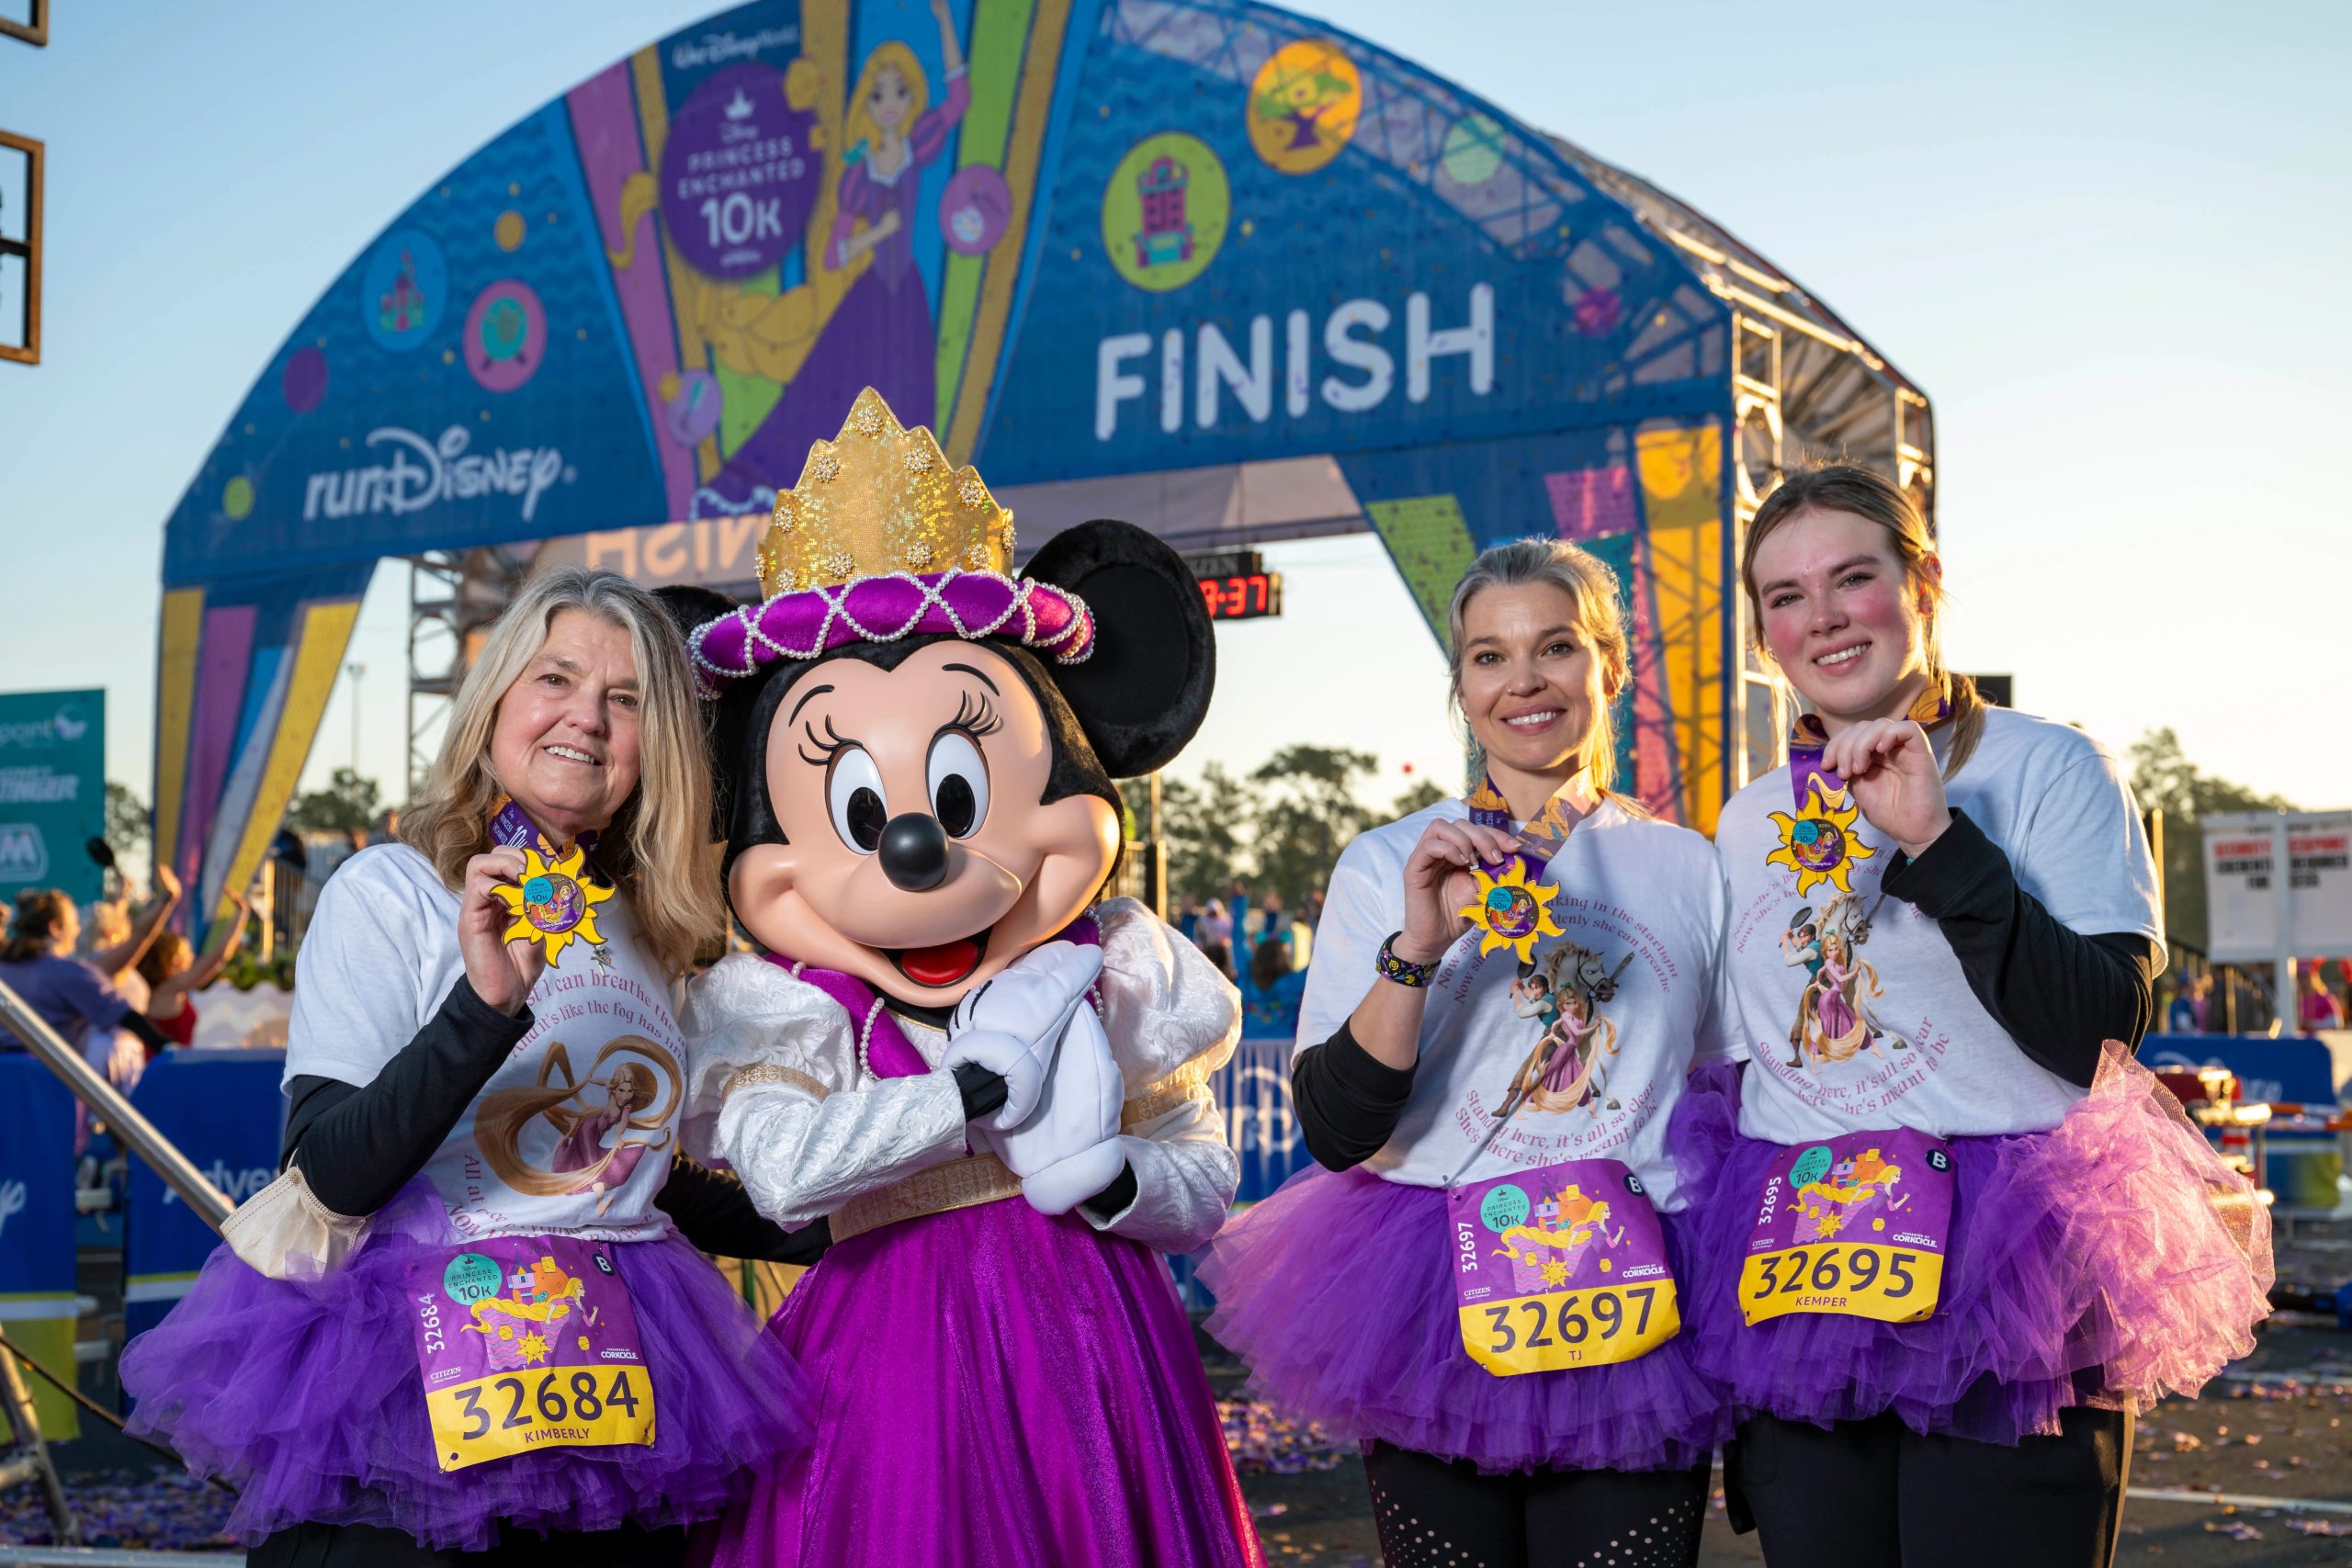 Colorado Resident Conquers Her First-Ever Race at Walt Disney World Resort After Life-Saving Lung Transplant Surgery